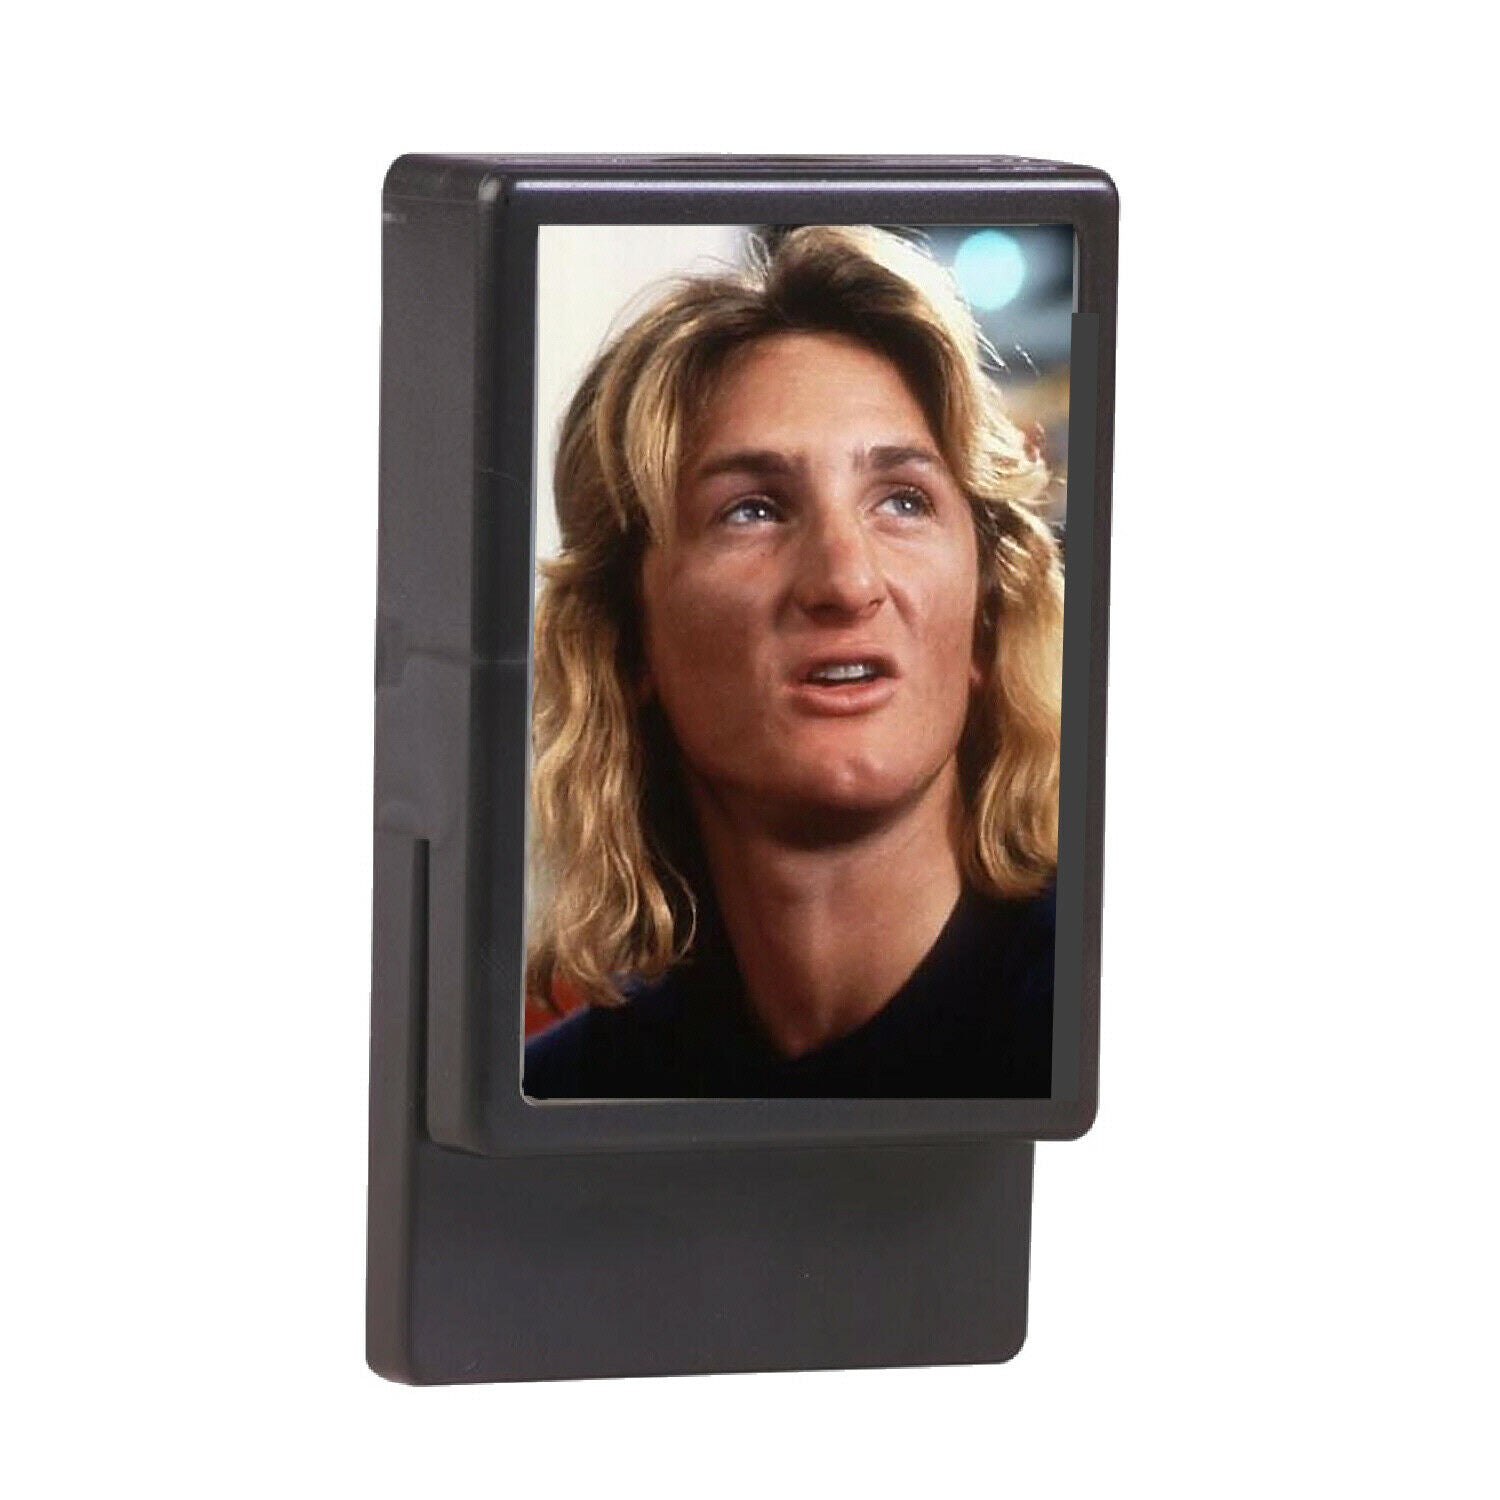 Jeff Spicoli Fast Times At Ridgemong High Magnetic Display Clip Big 4 inches